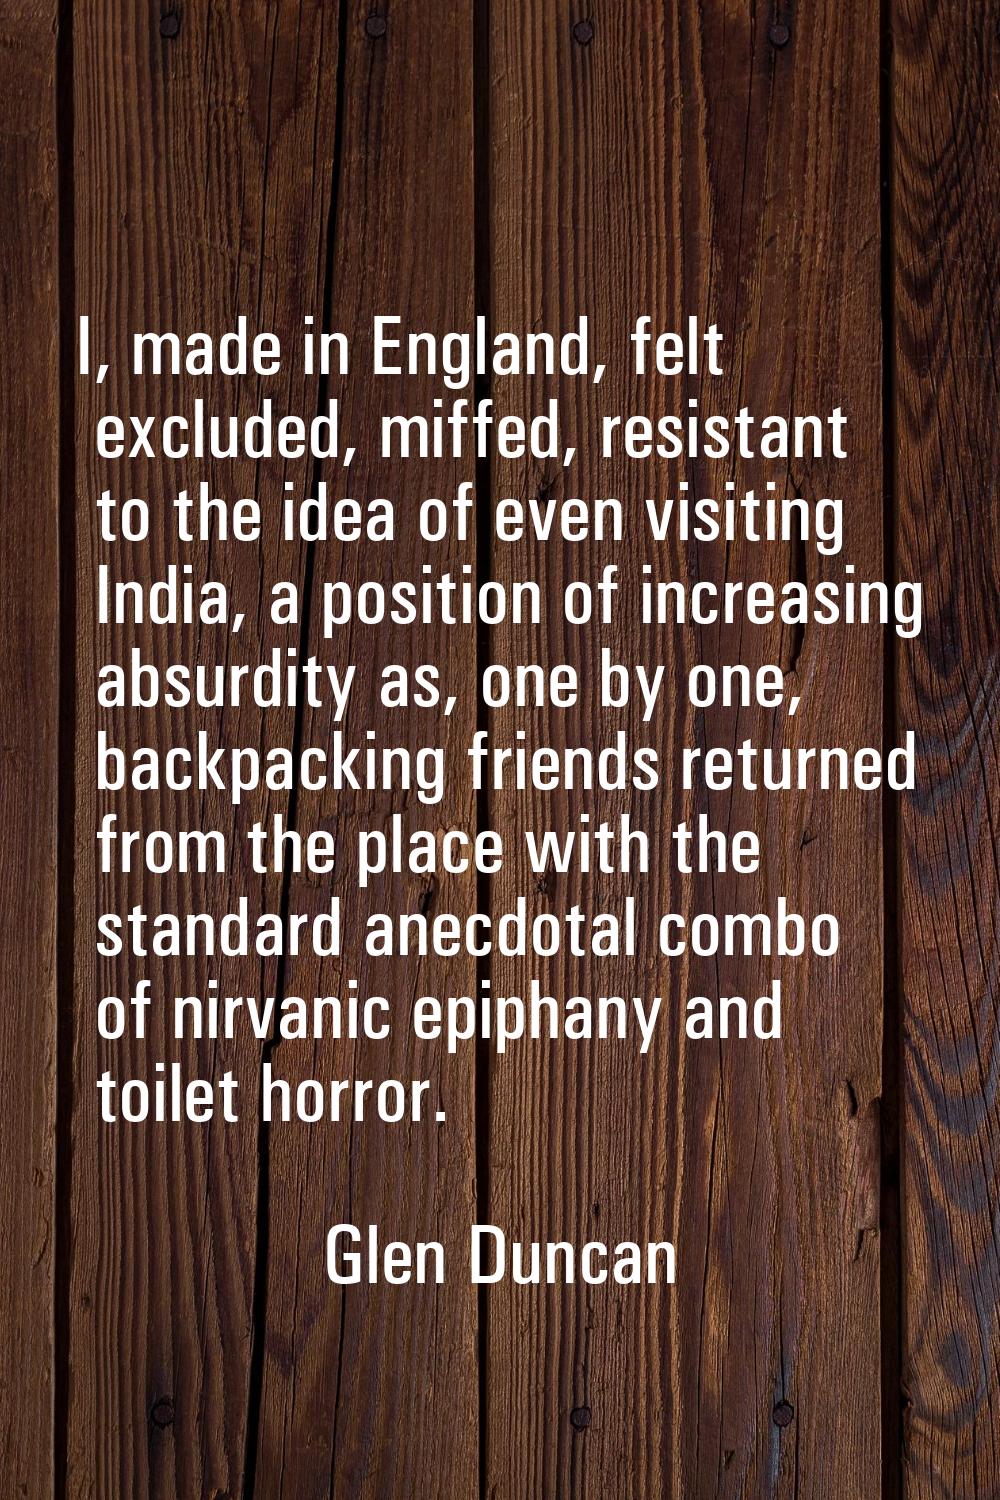 I, made in England, felt excluded, miffed, resistant to the idea of even visiting India, a position